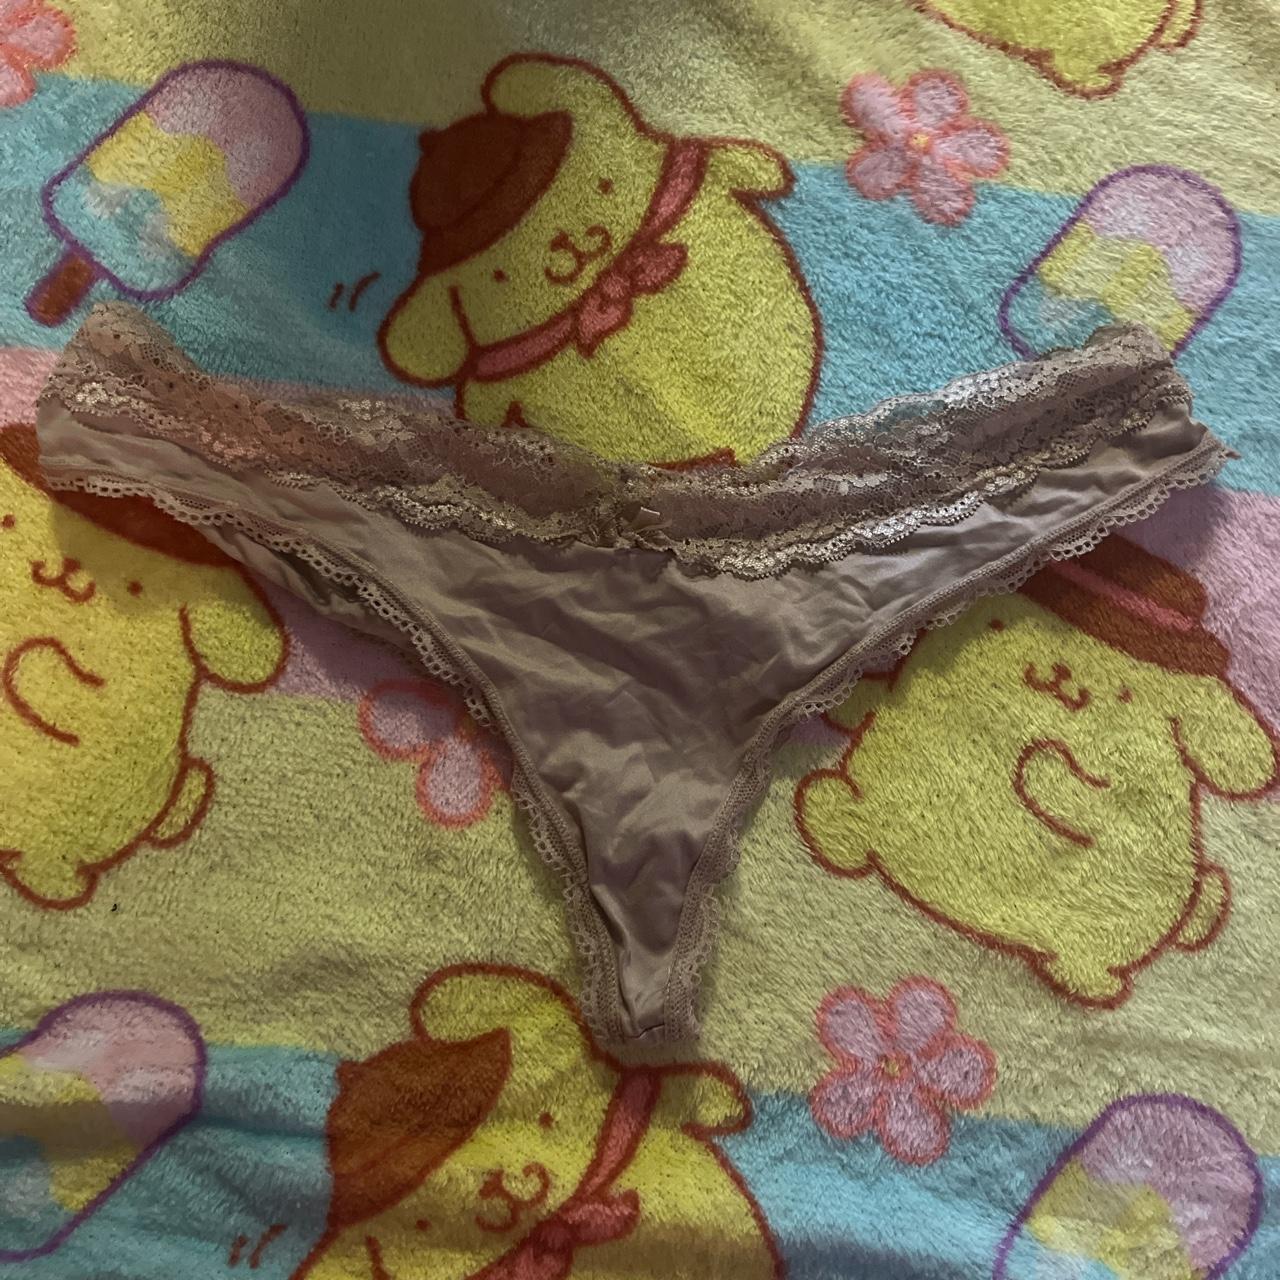 Used Panties for Sale!